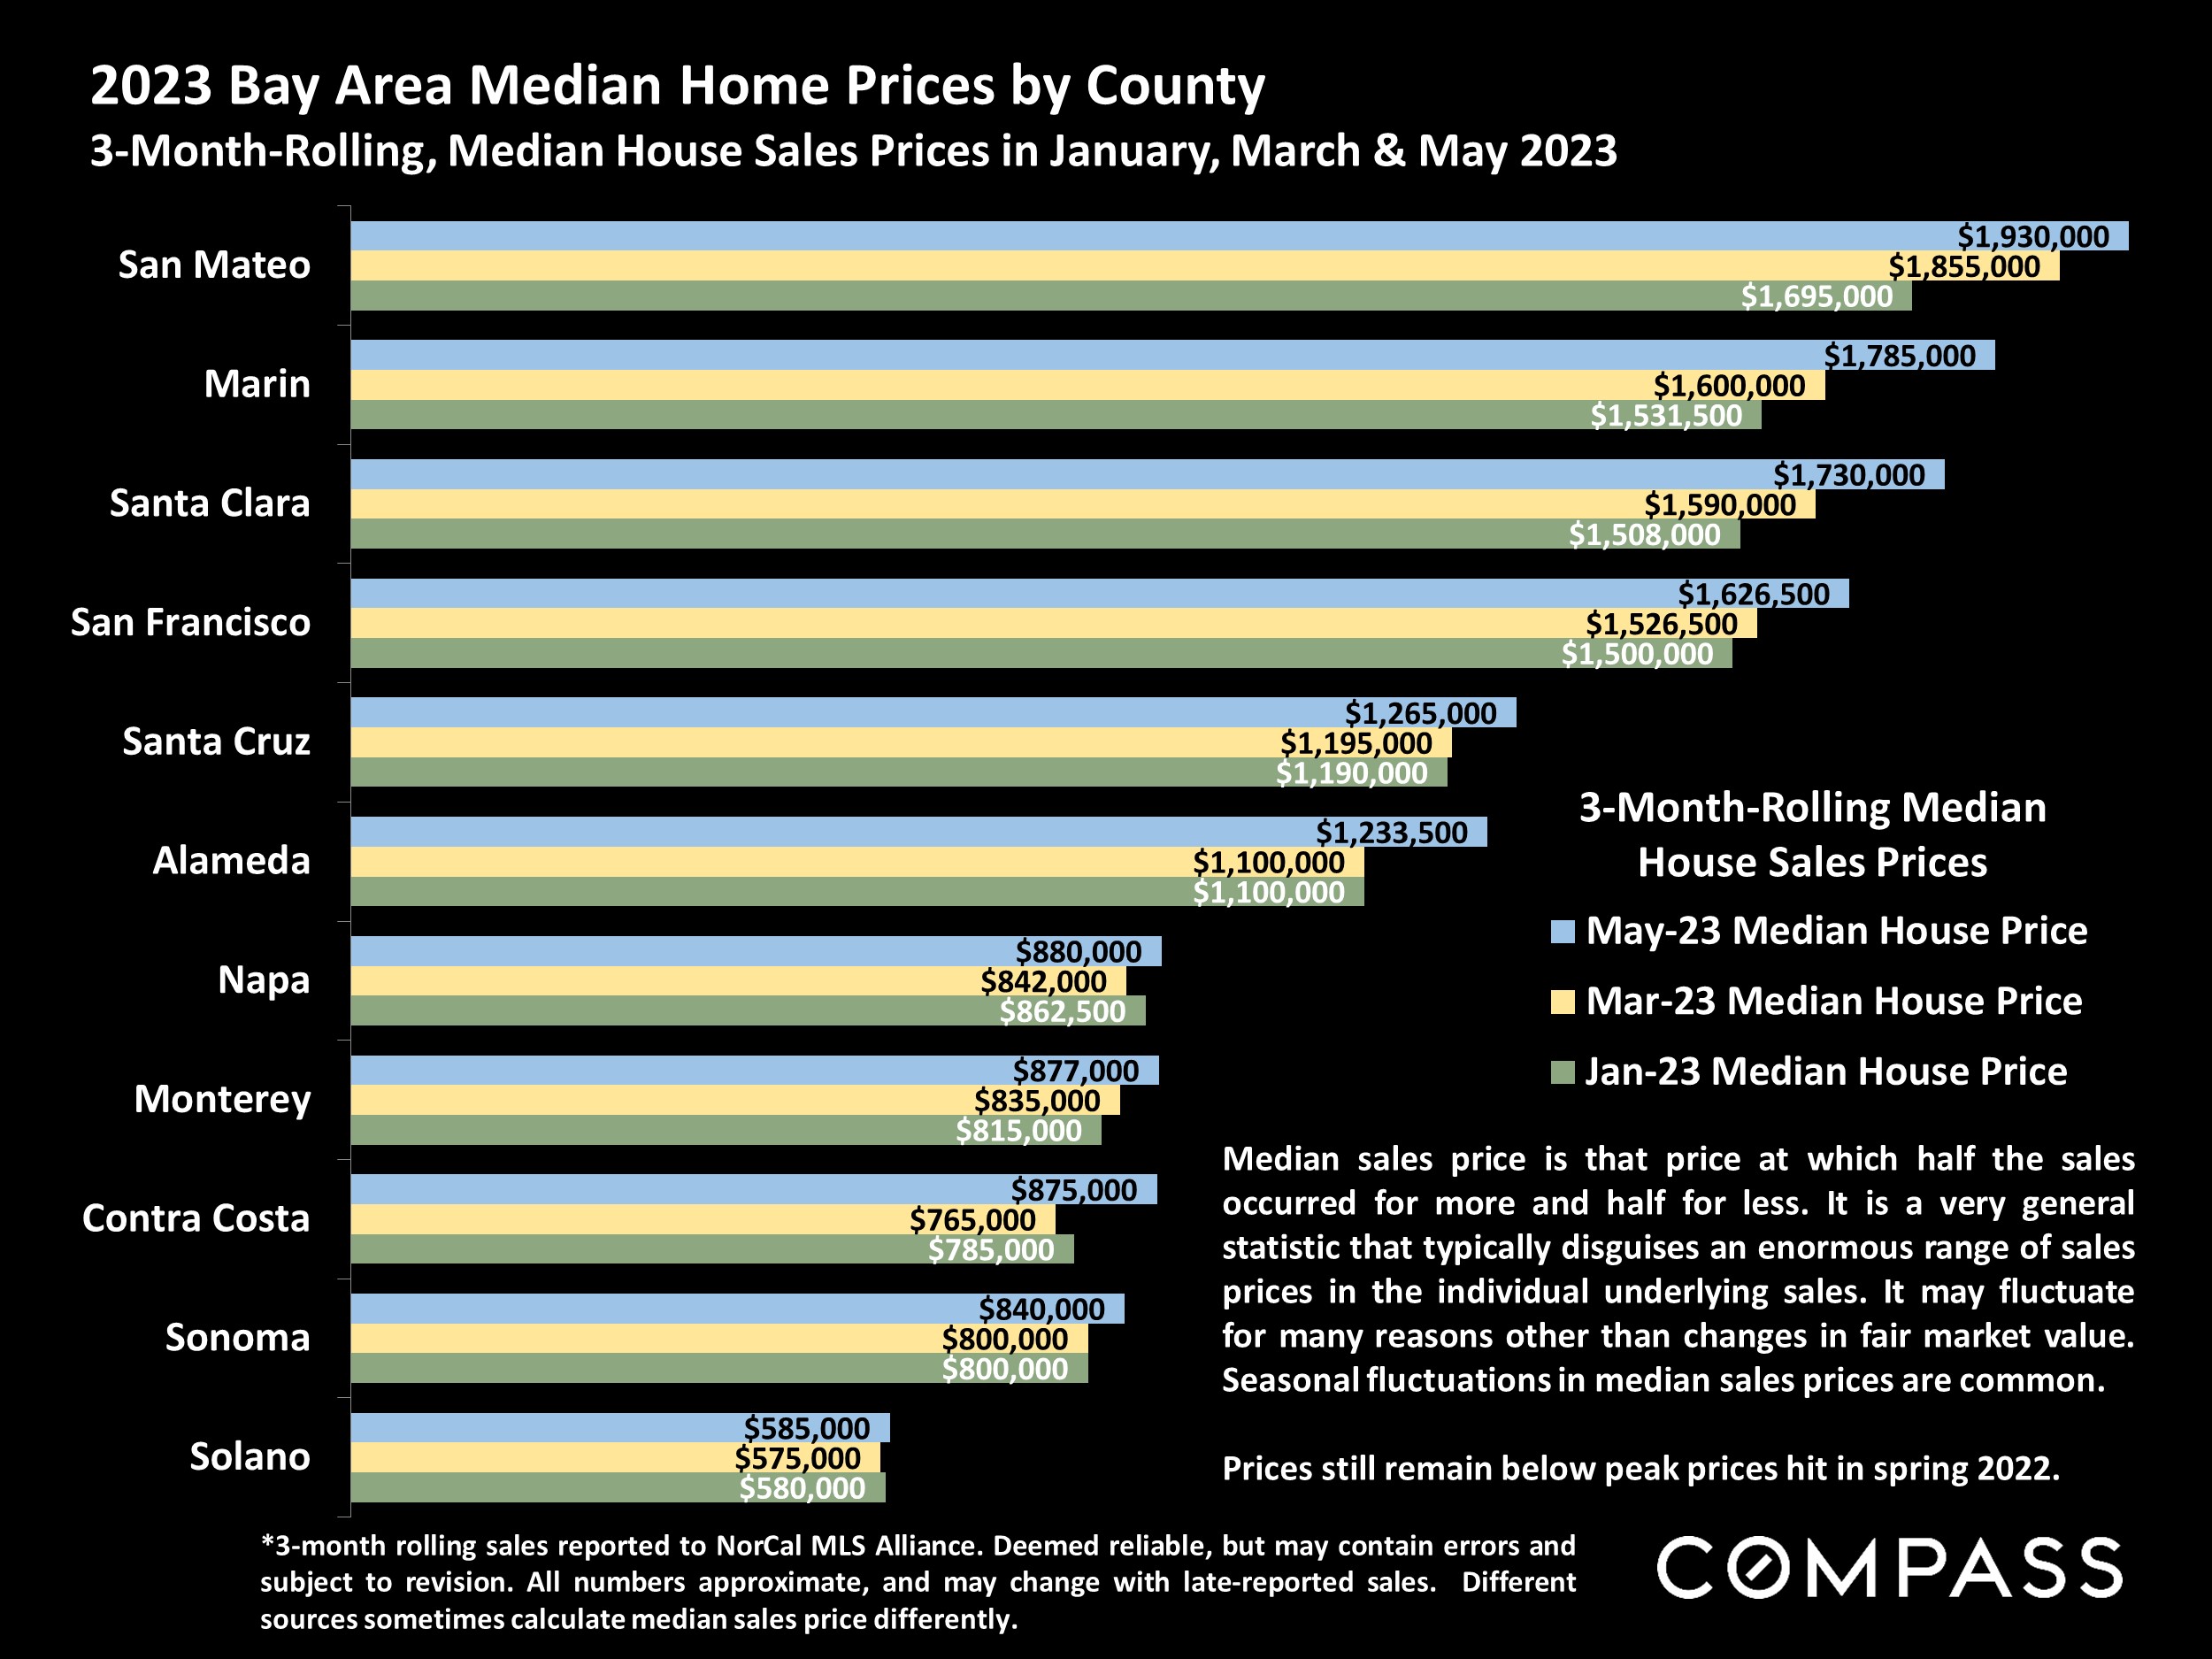 2023 Bay Area Median Home Prices by County